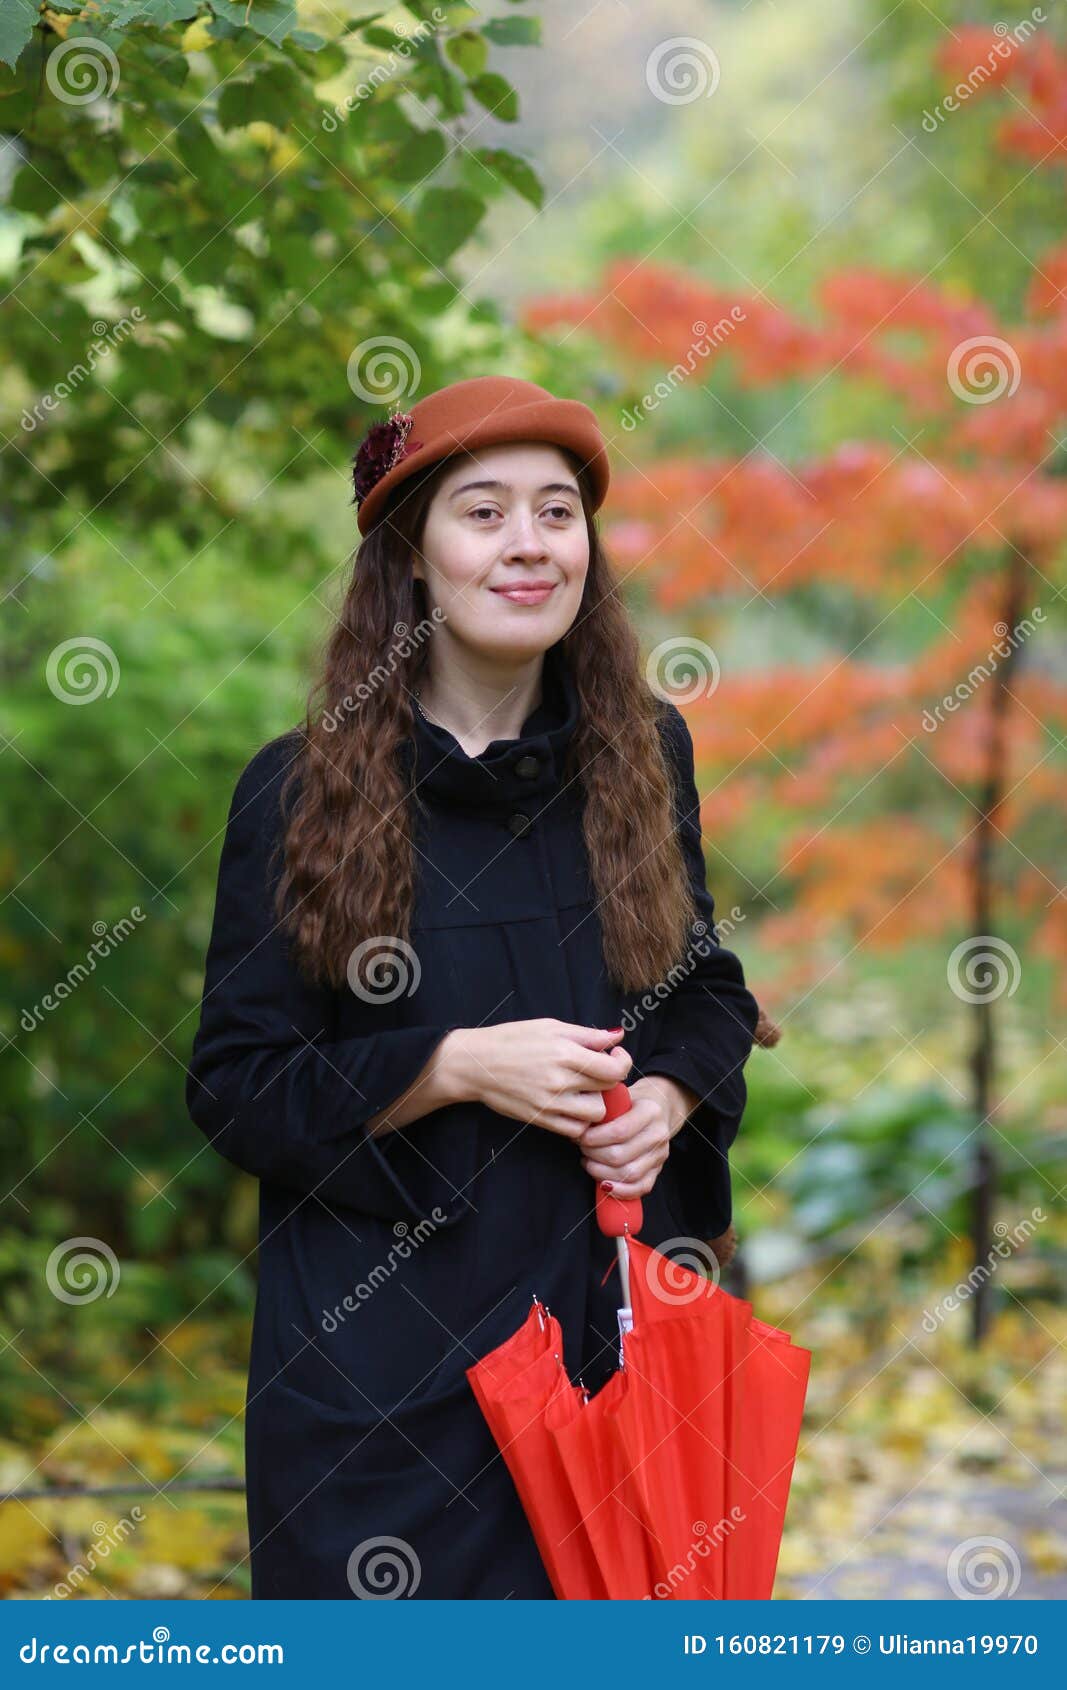 Romantic Fall Outdoor Retro Vintage Portrait of Woman with Red Umbrella ...